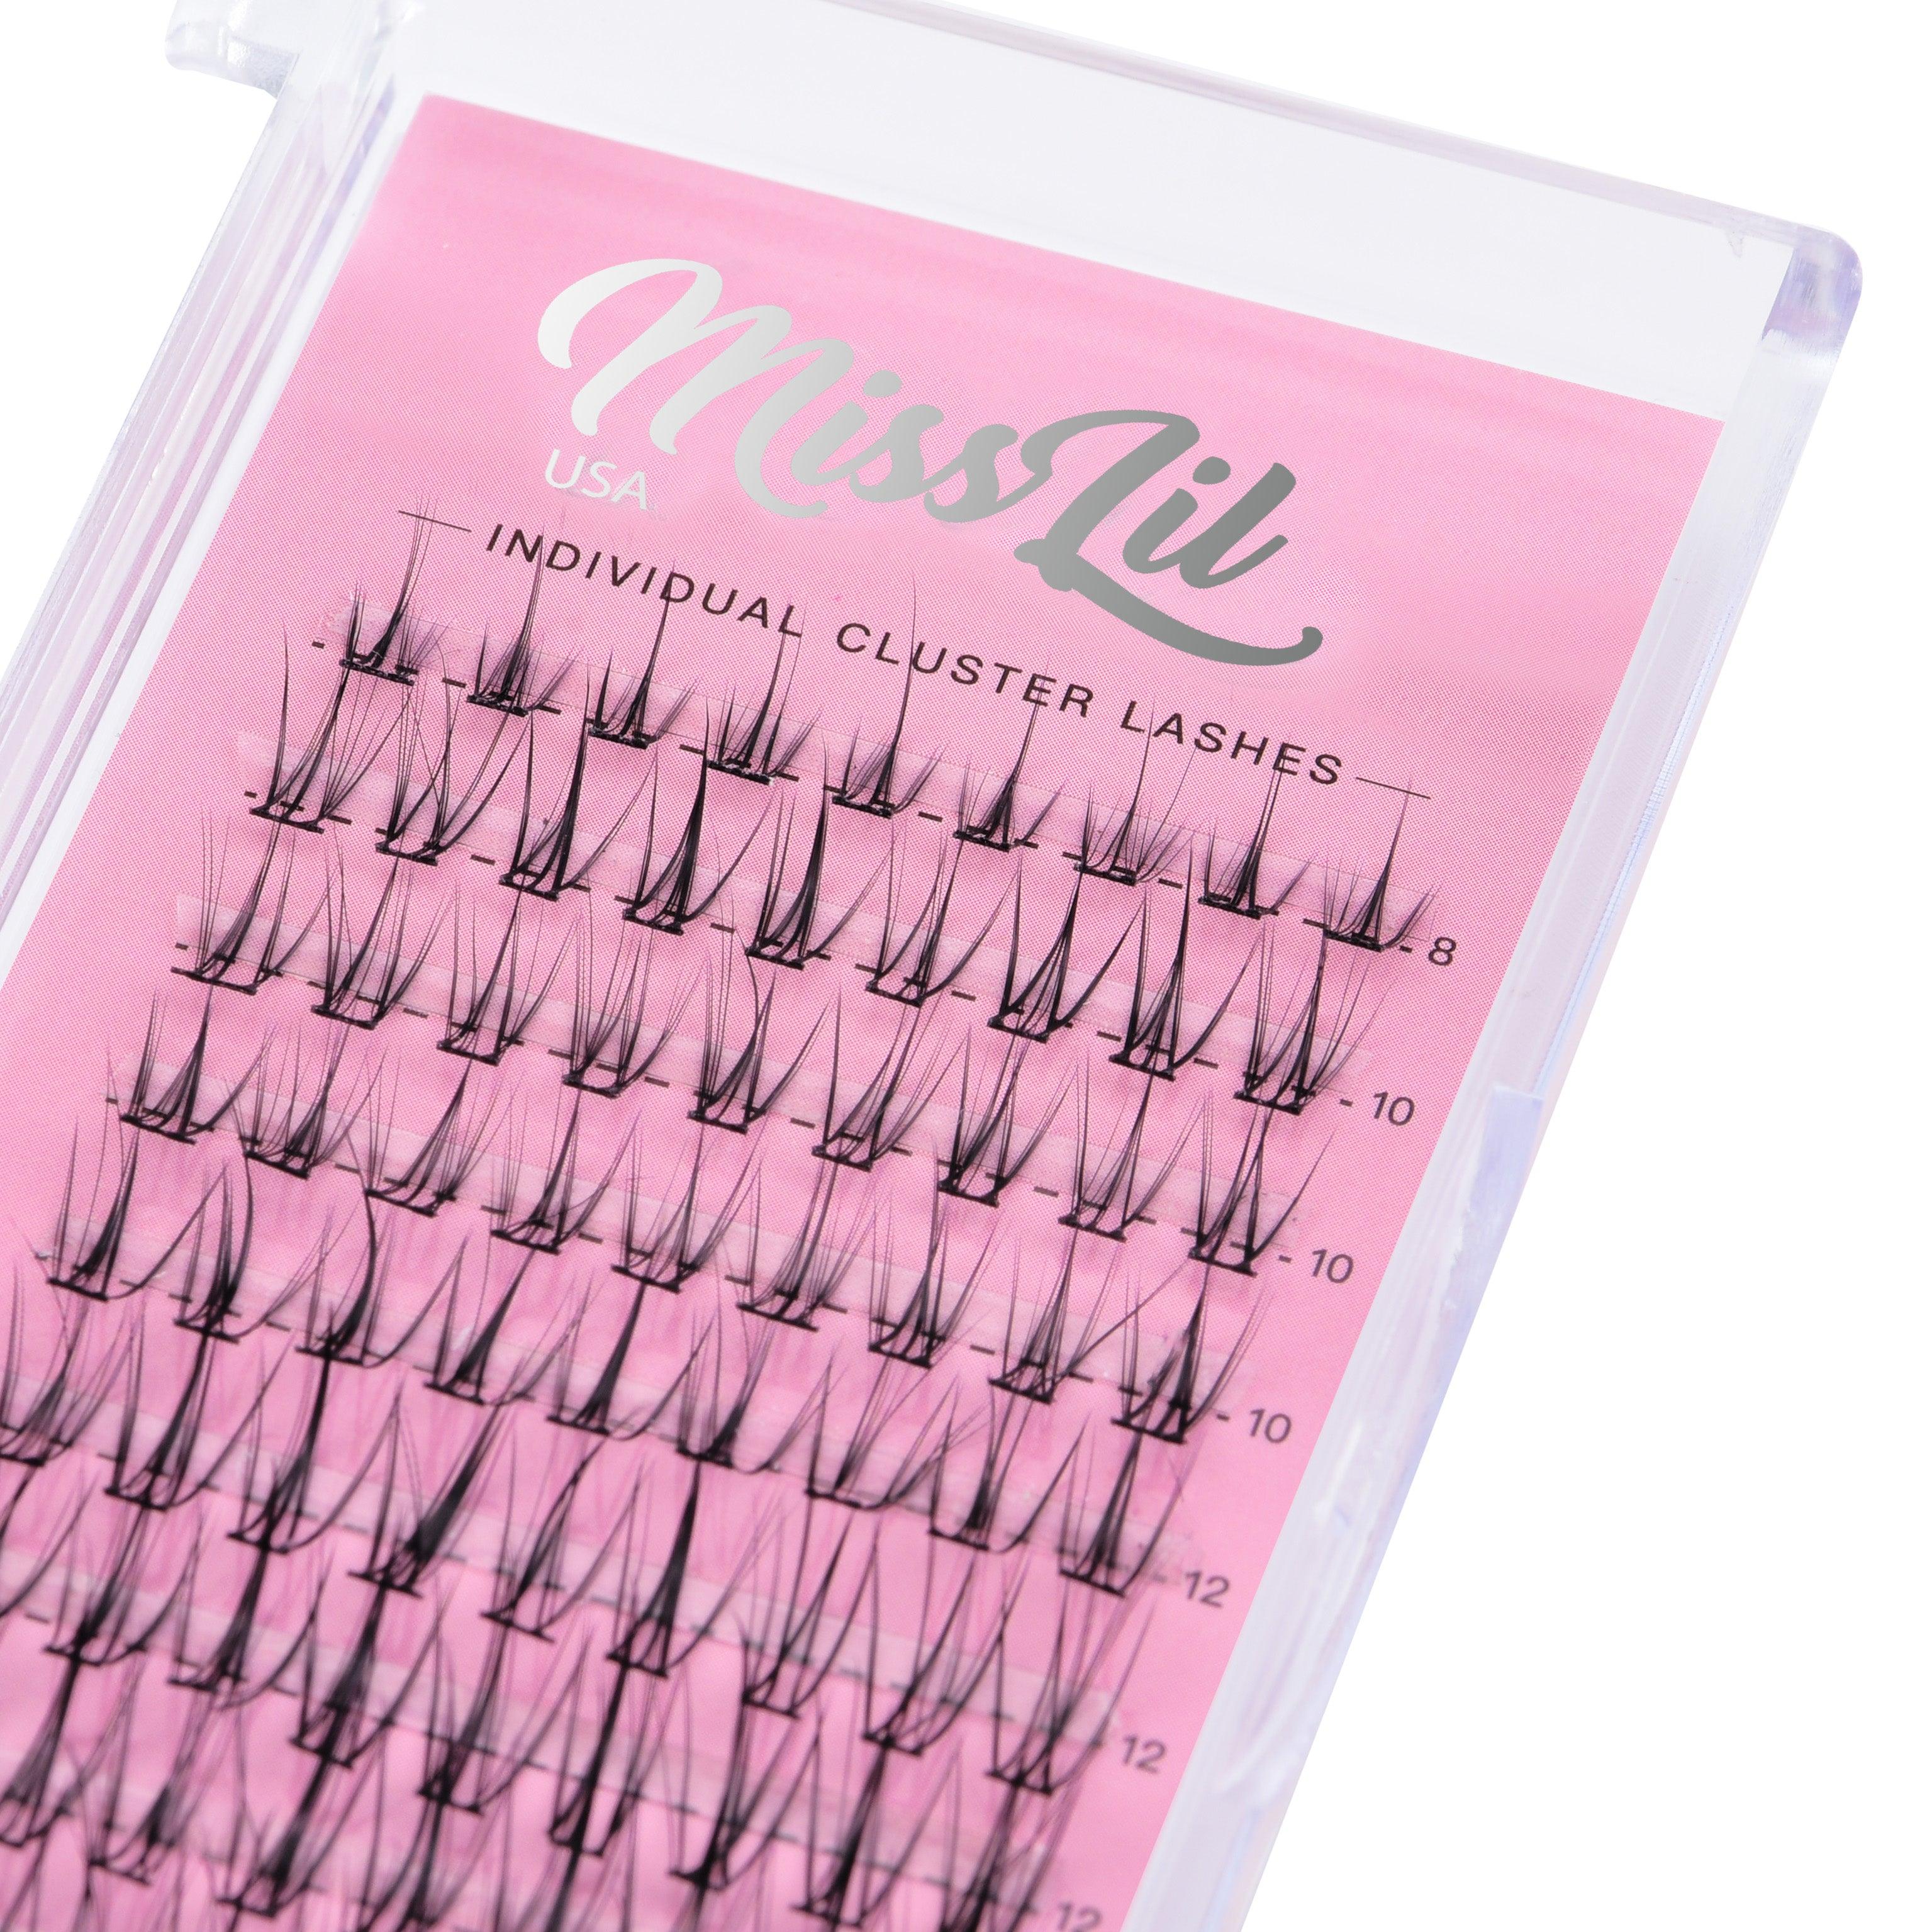 DIY Cluster lash extensions AD-34 Small MIX Tray - Miss Lil USA